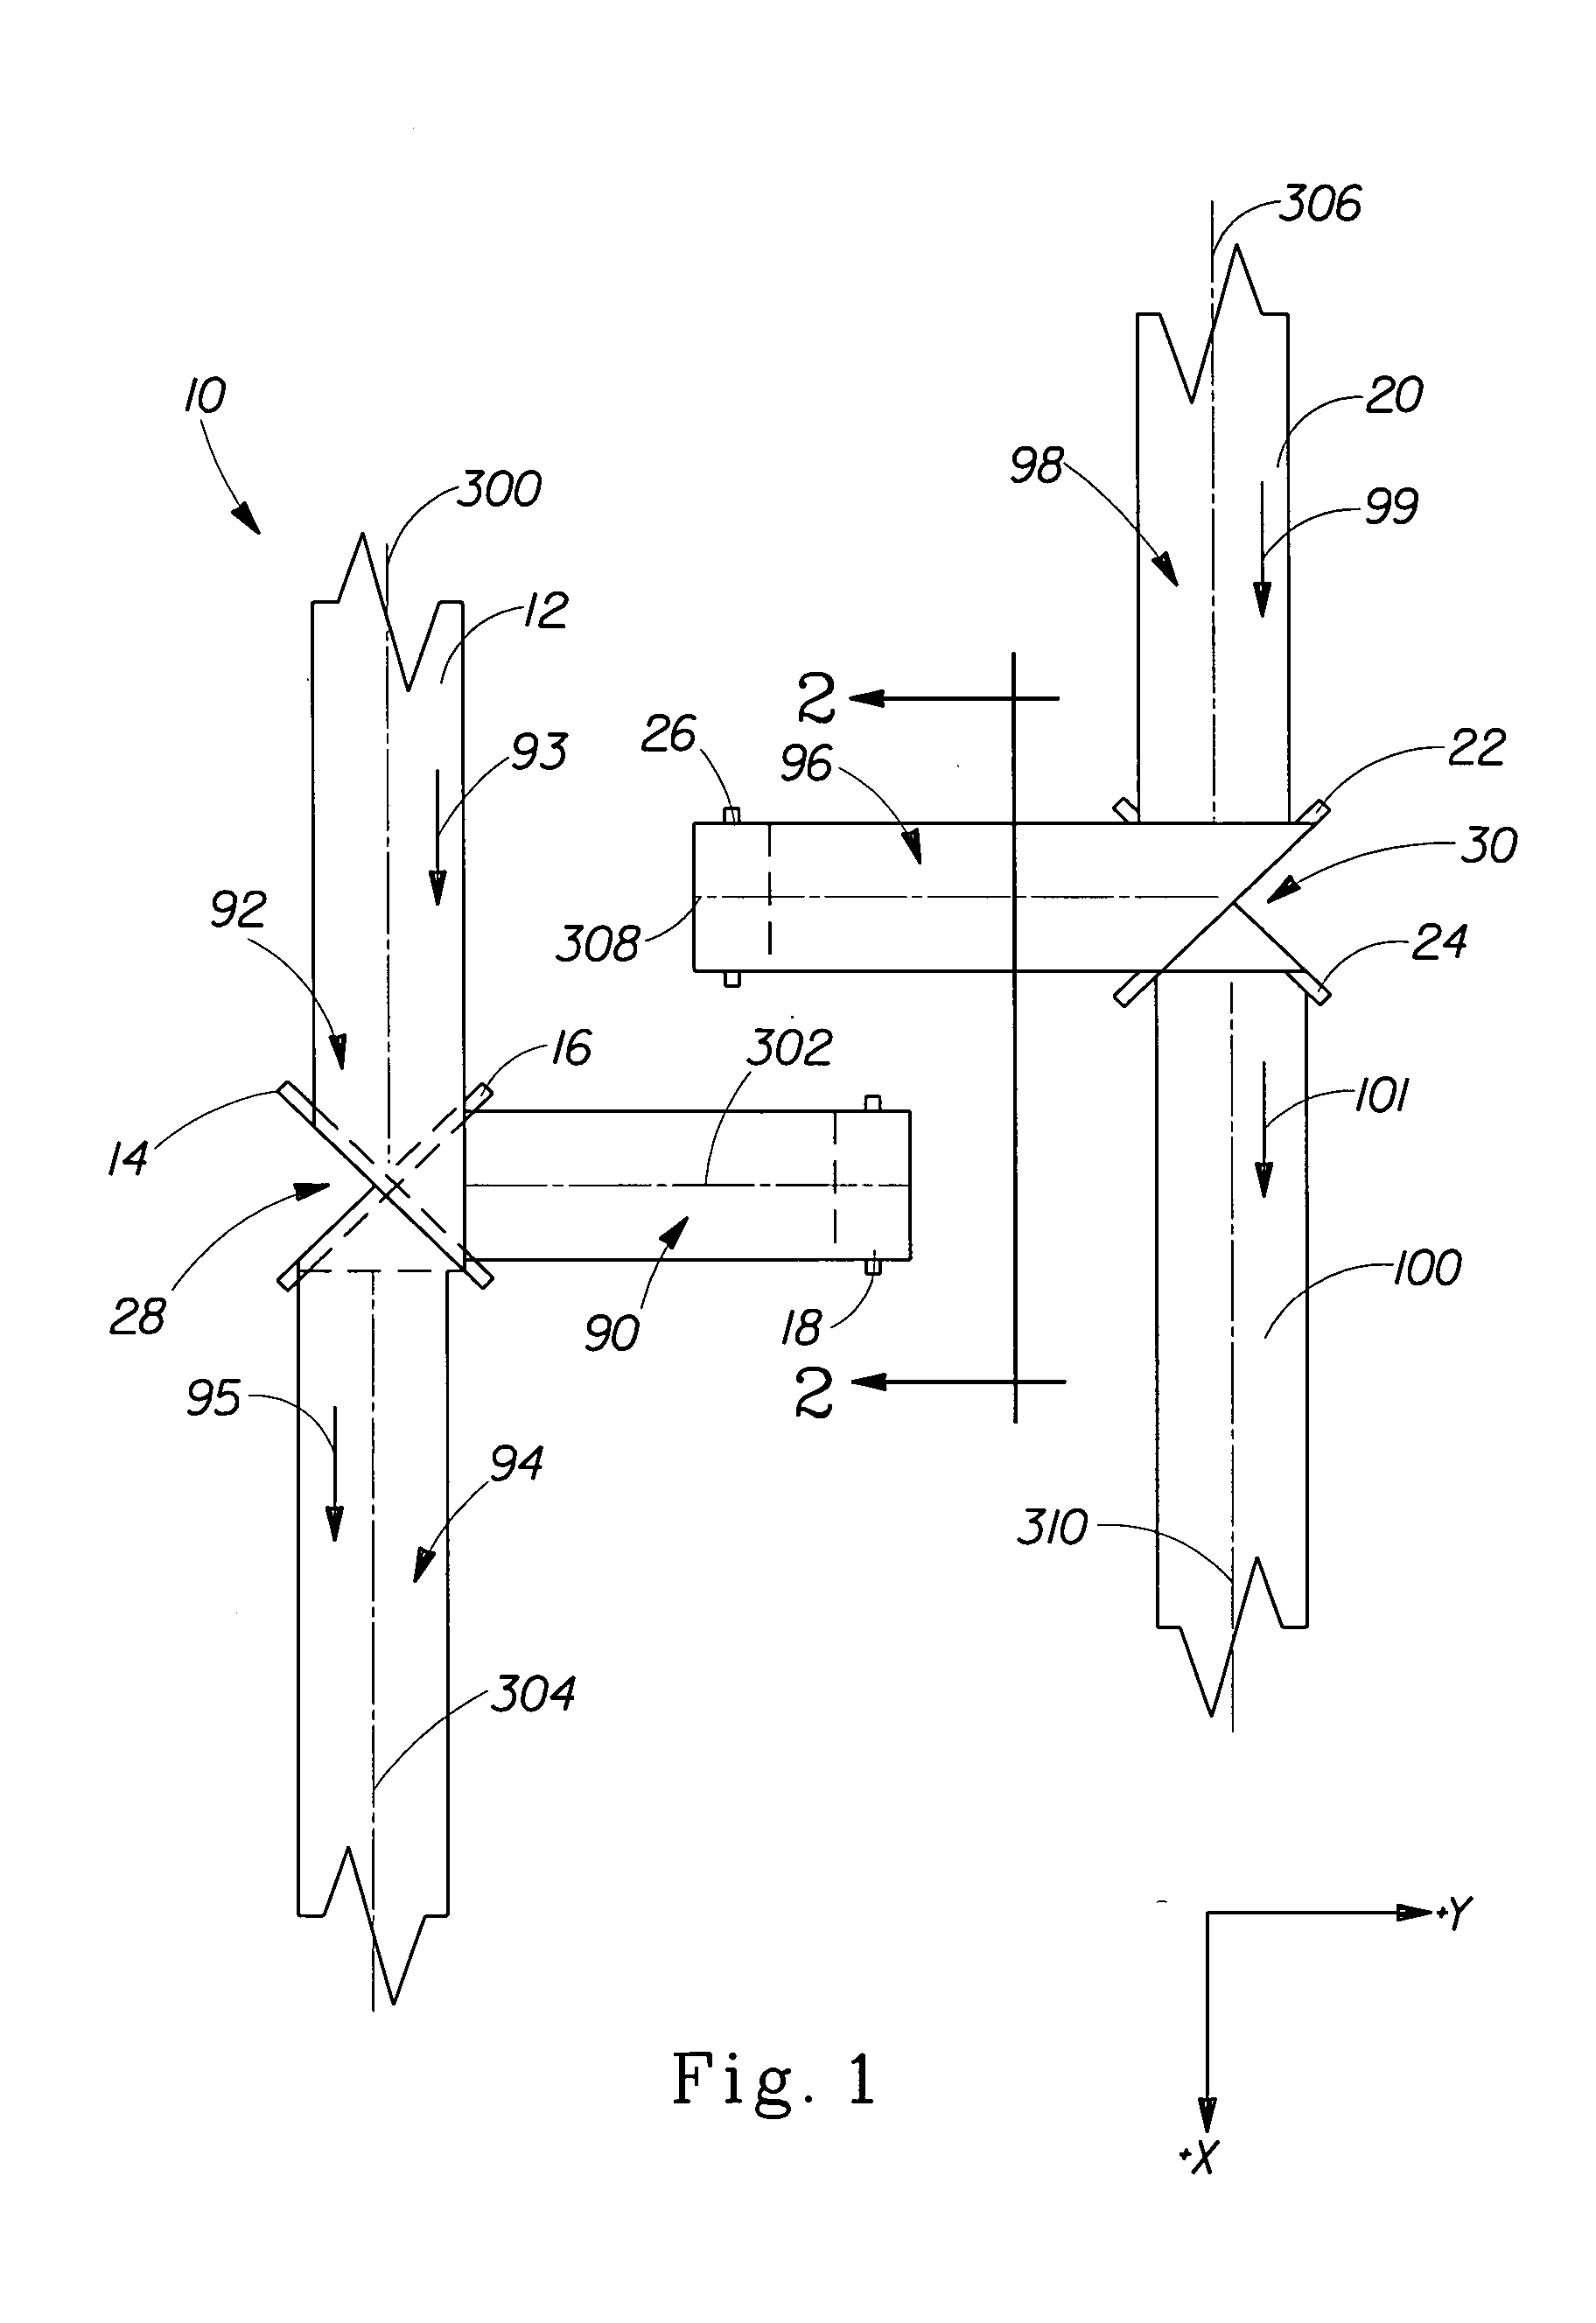 Method of placing a material transversely on a moving web